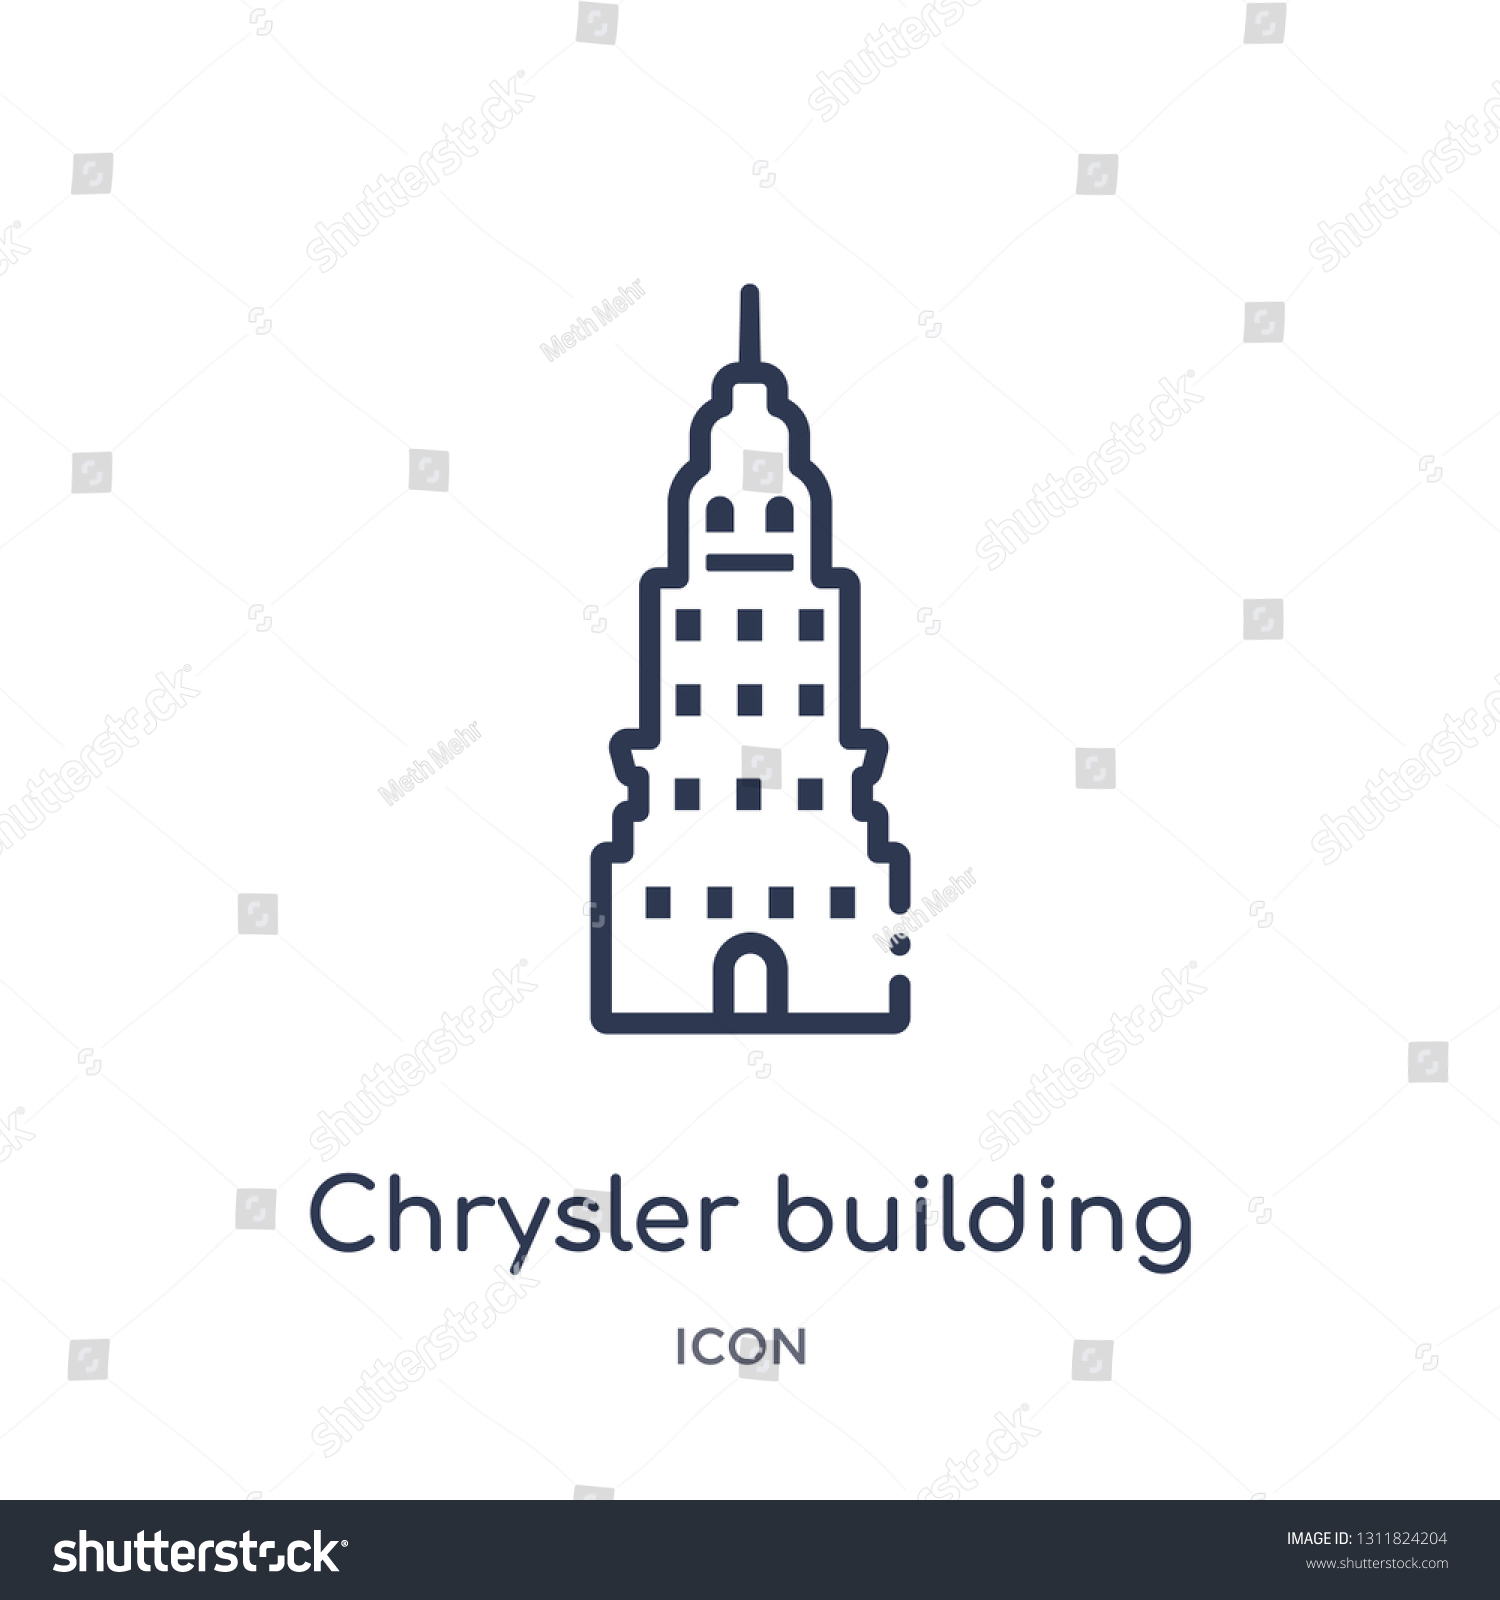 SVG of chrysler building icon from monuments outline collection. Thin line chrysler building icon isolated on white background. svg